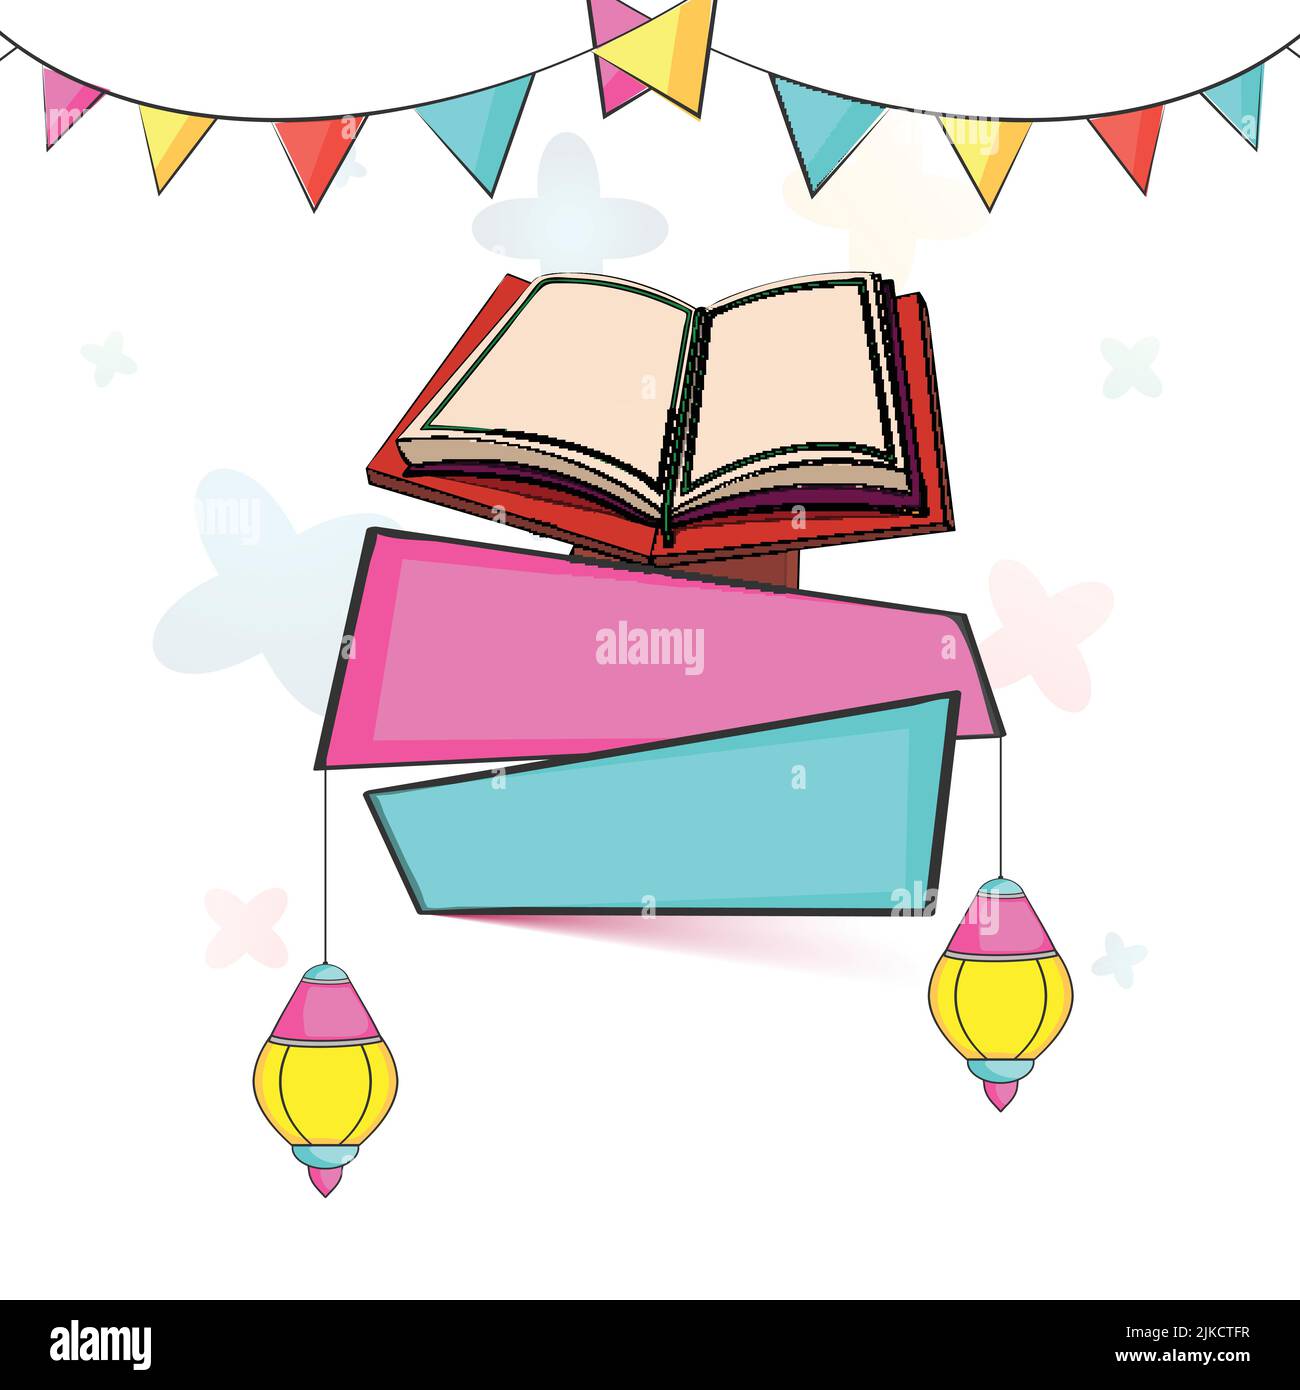 Islamic Holy Book Quran with blank paper banners and hanging lanterns for Muslim Community Festivals celebration. Stock Vector